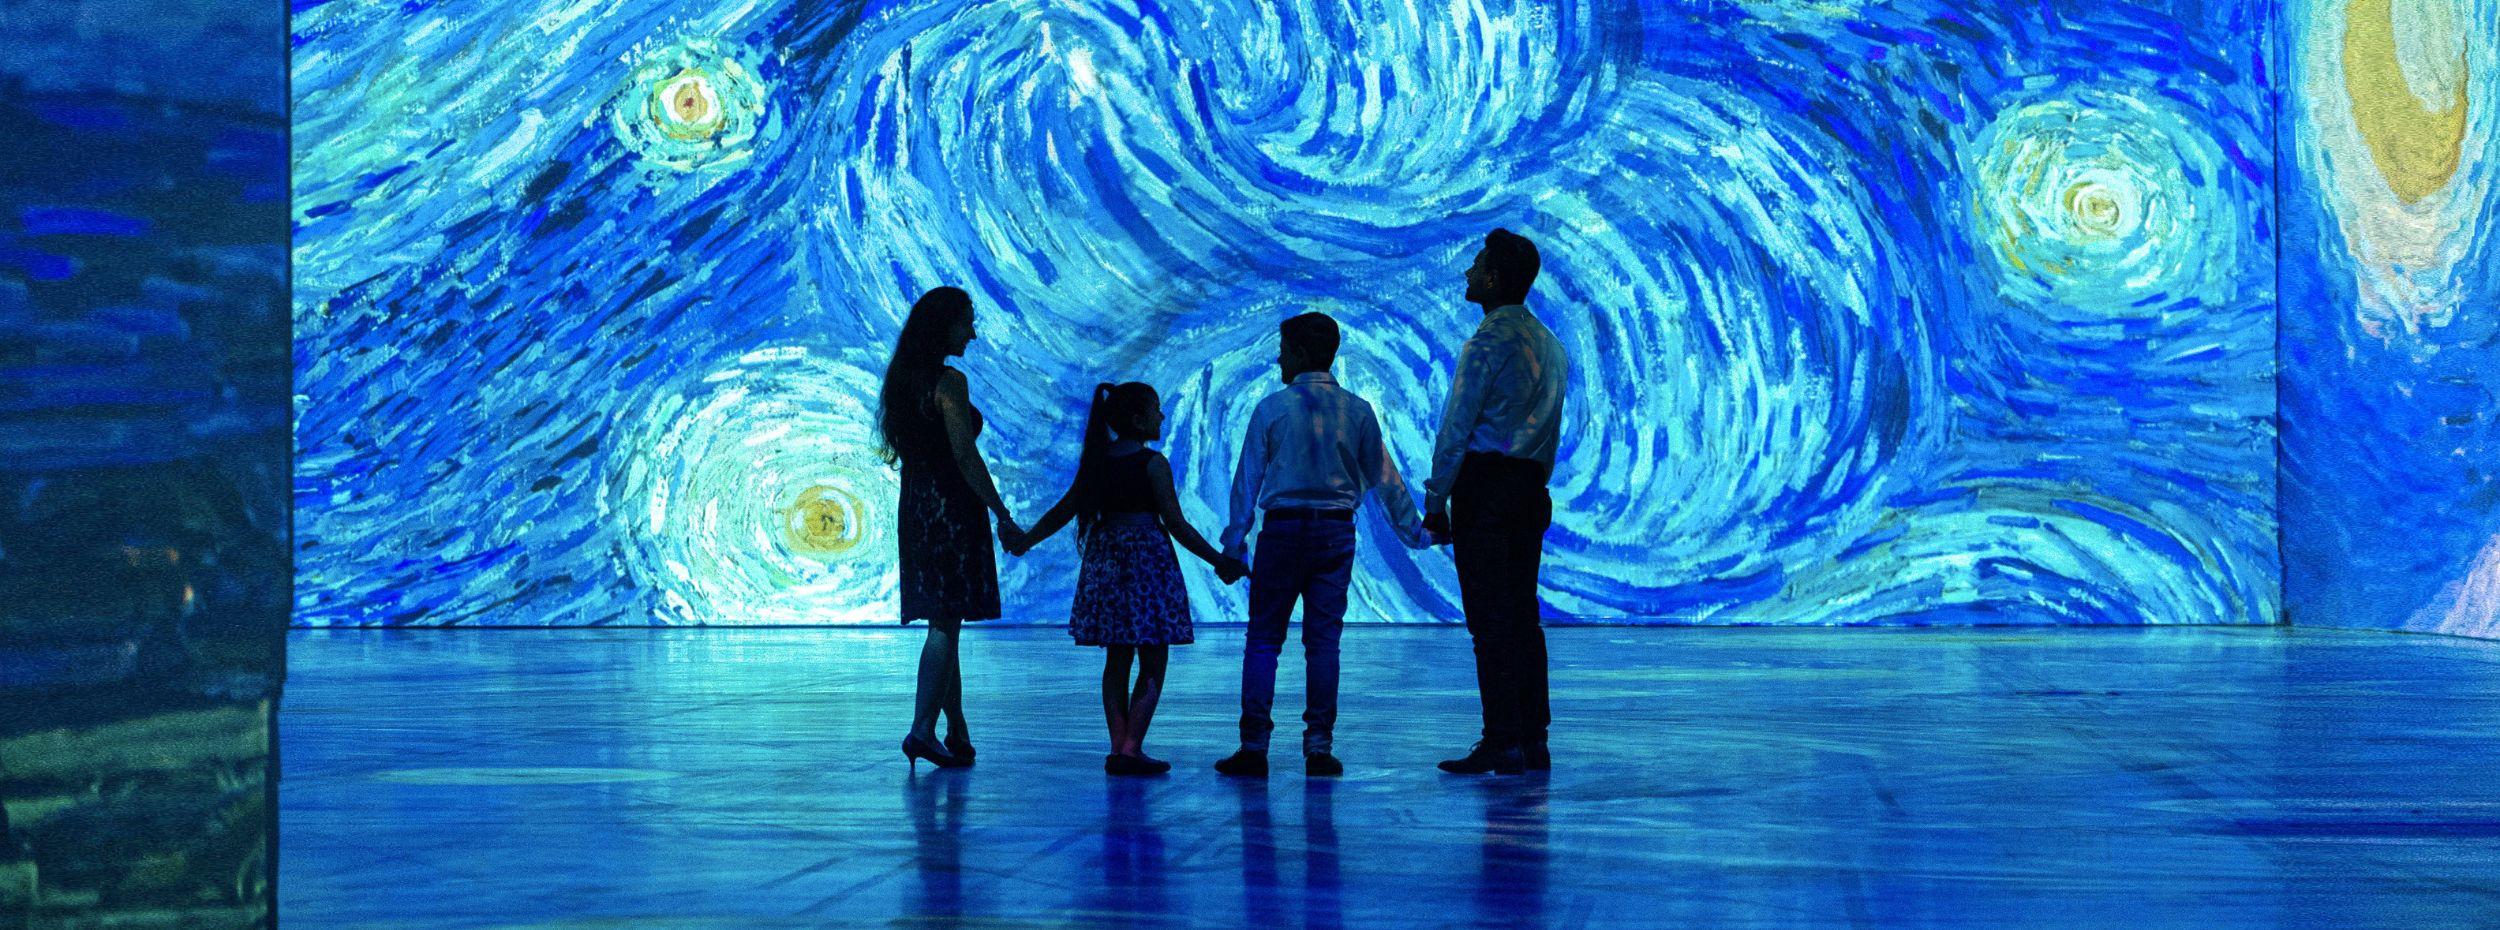 Beyond Van Gogh: The Immersive Experience Comes to Myrtle Beach